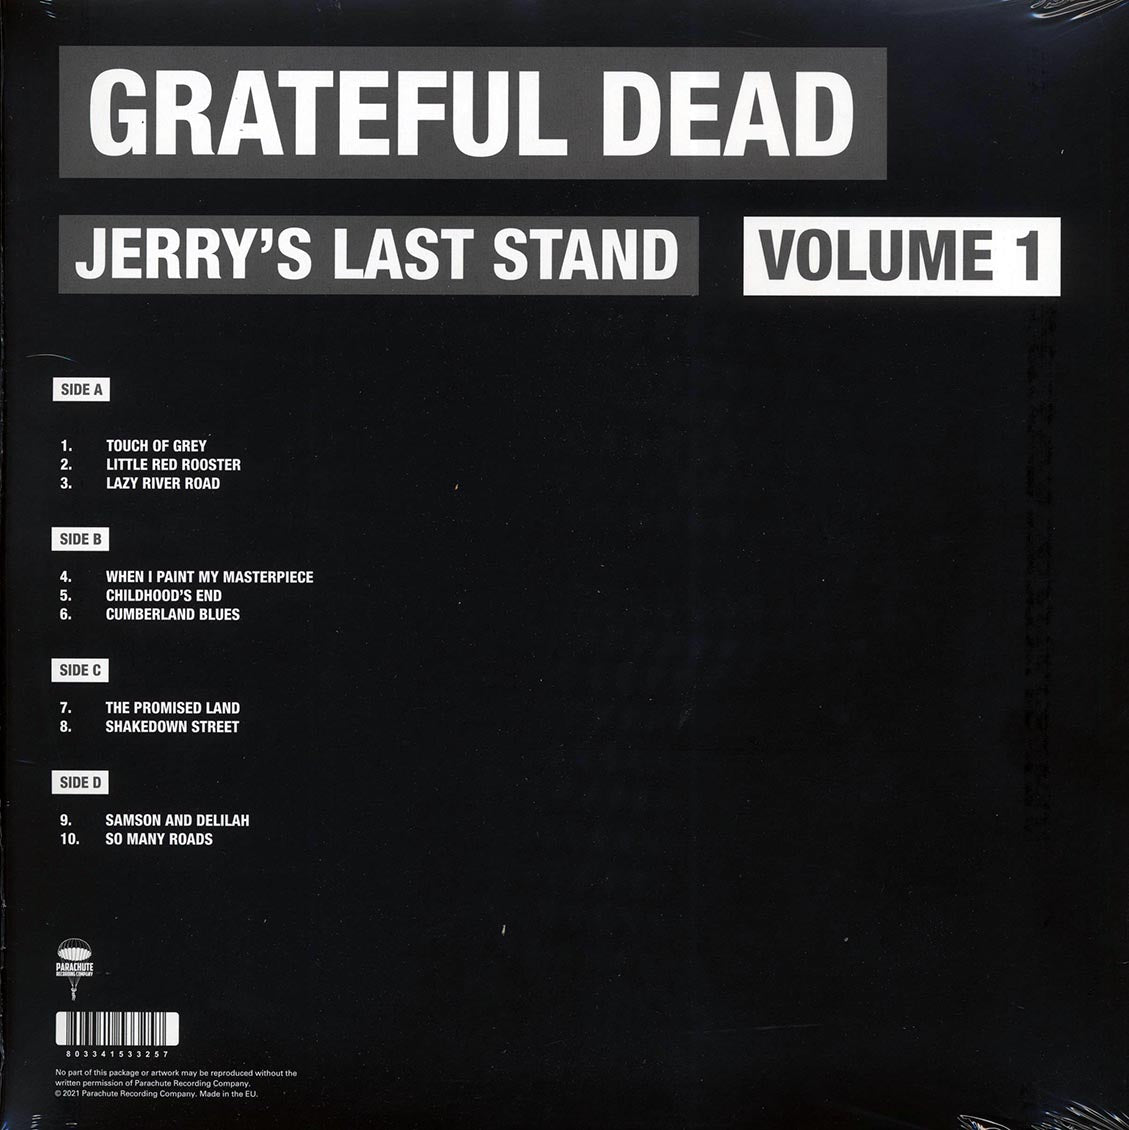 Grateful Dead - Jerry's Last Stand Volume 1: Soldier Field, Chicago, July 9th, 1995